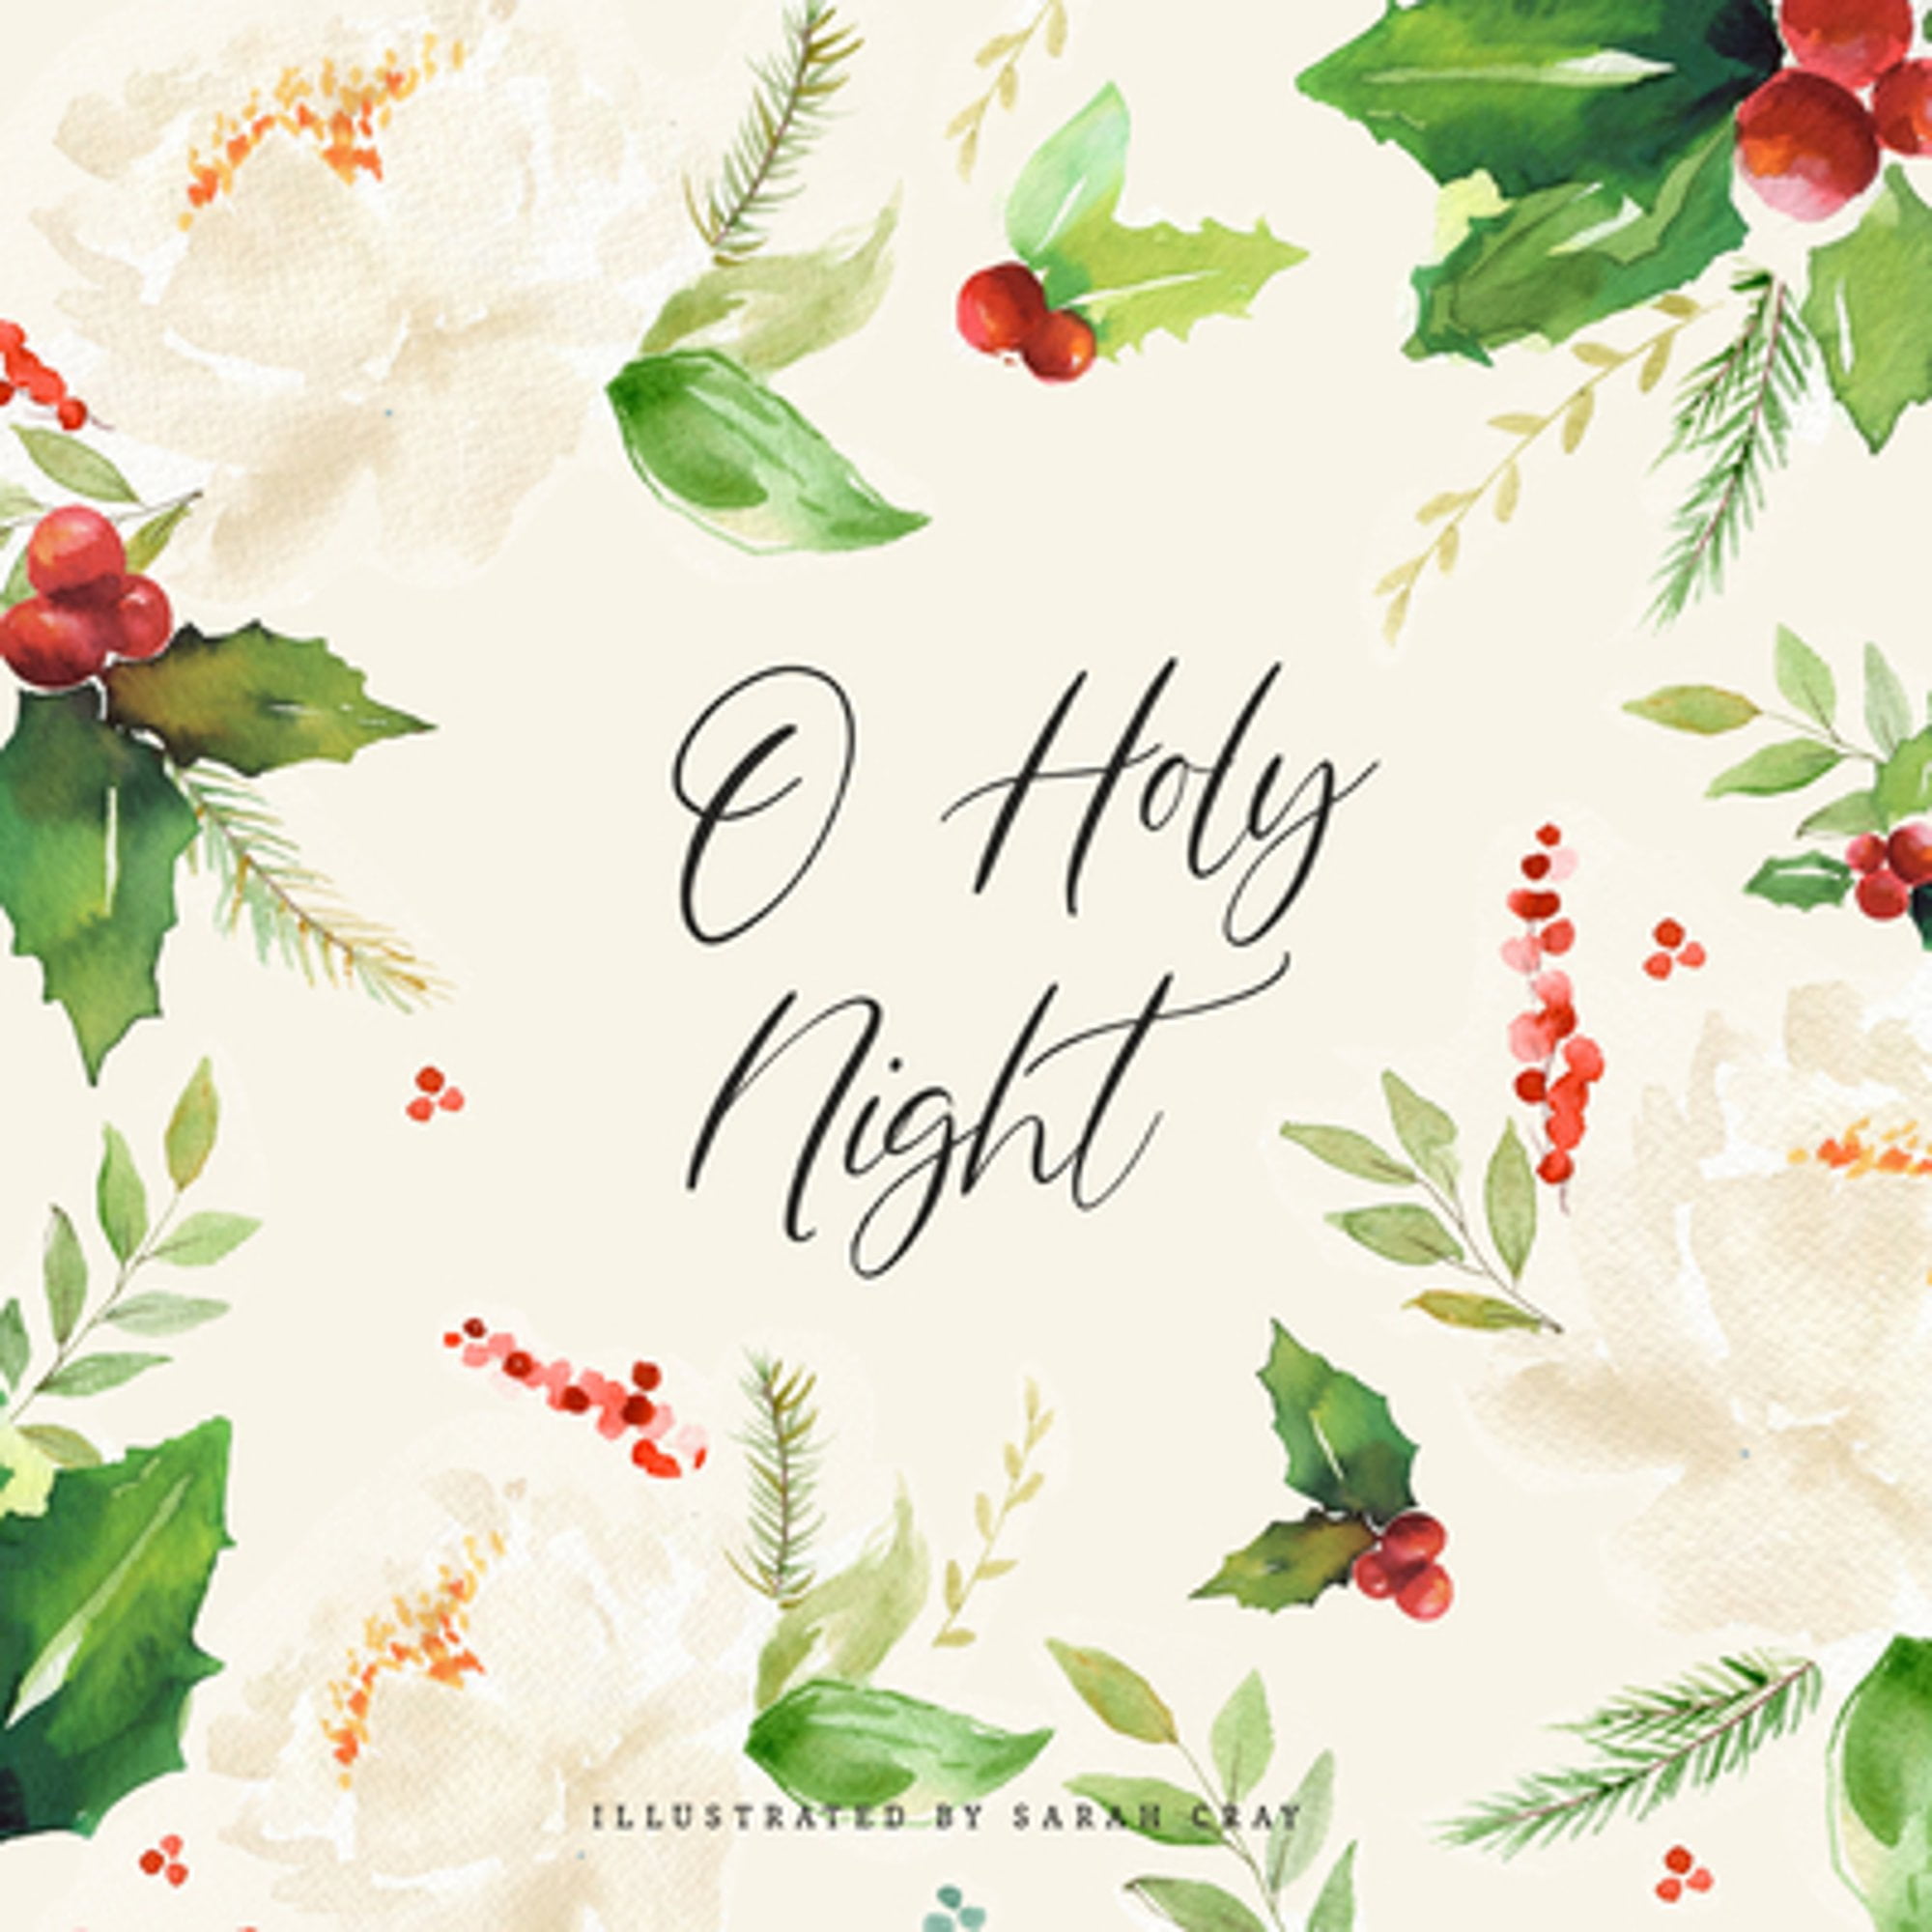 Pre-Owned O Holy Night (Hardcover 9781423658139) by Sarah Cray